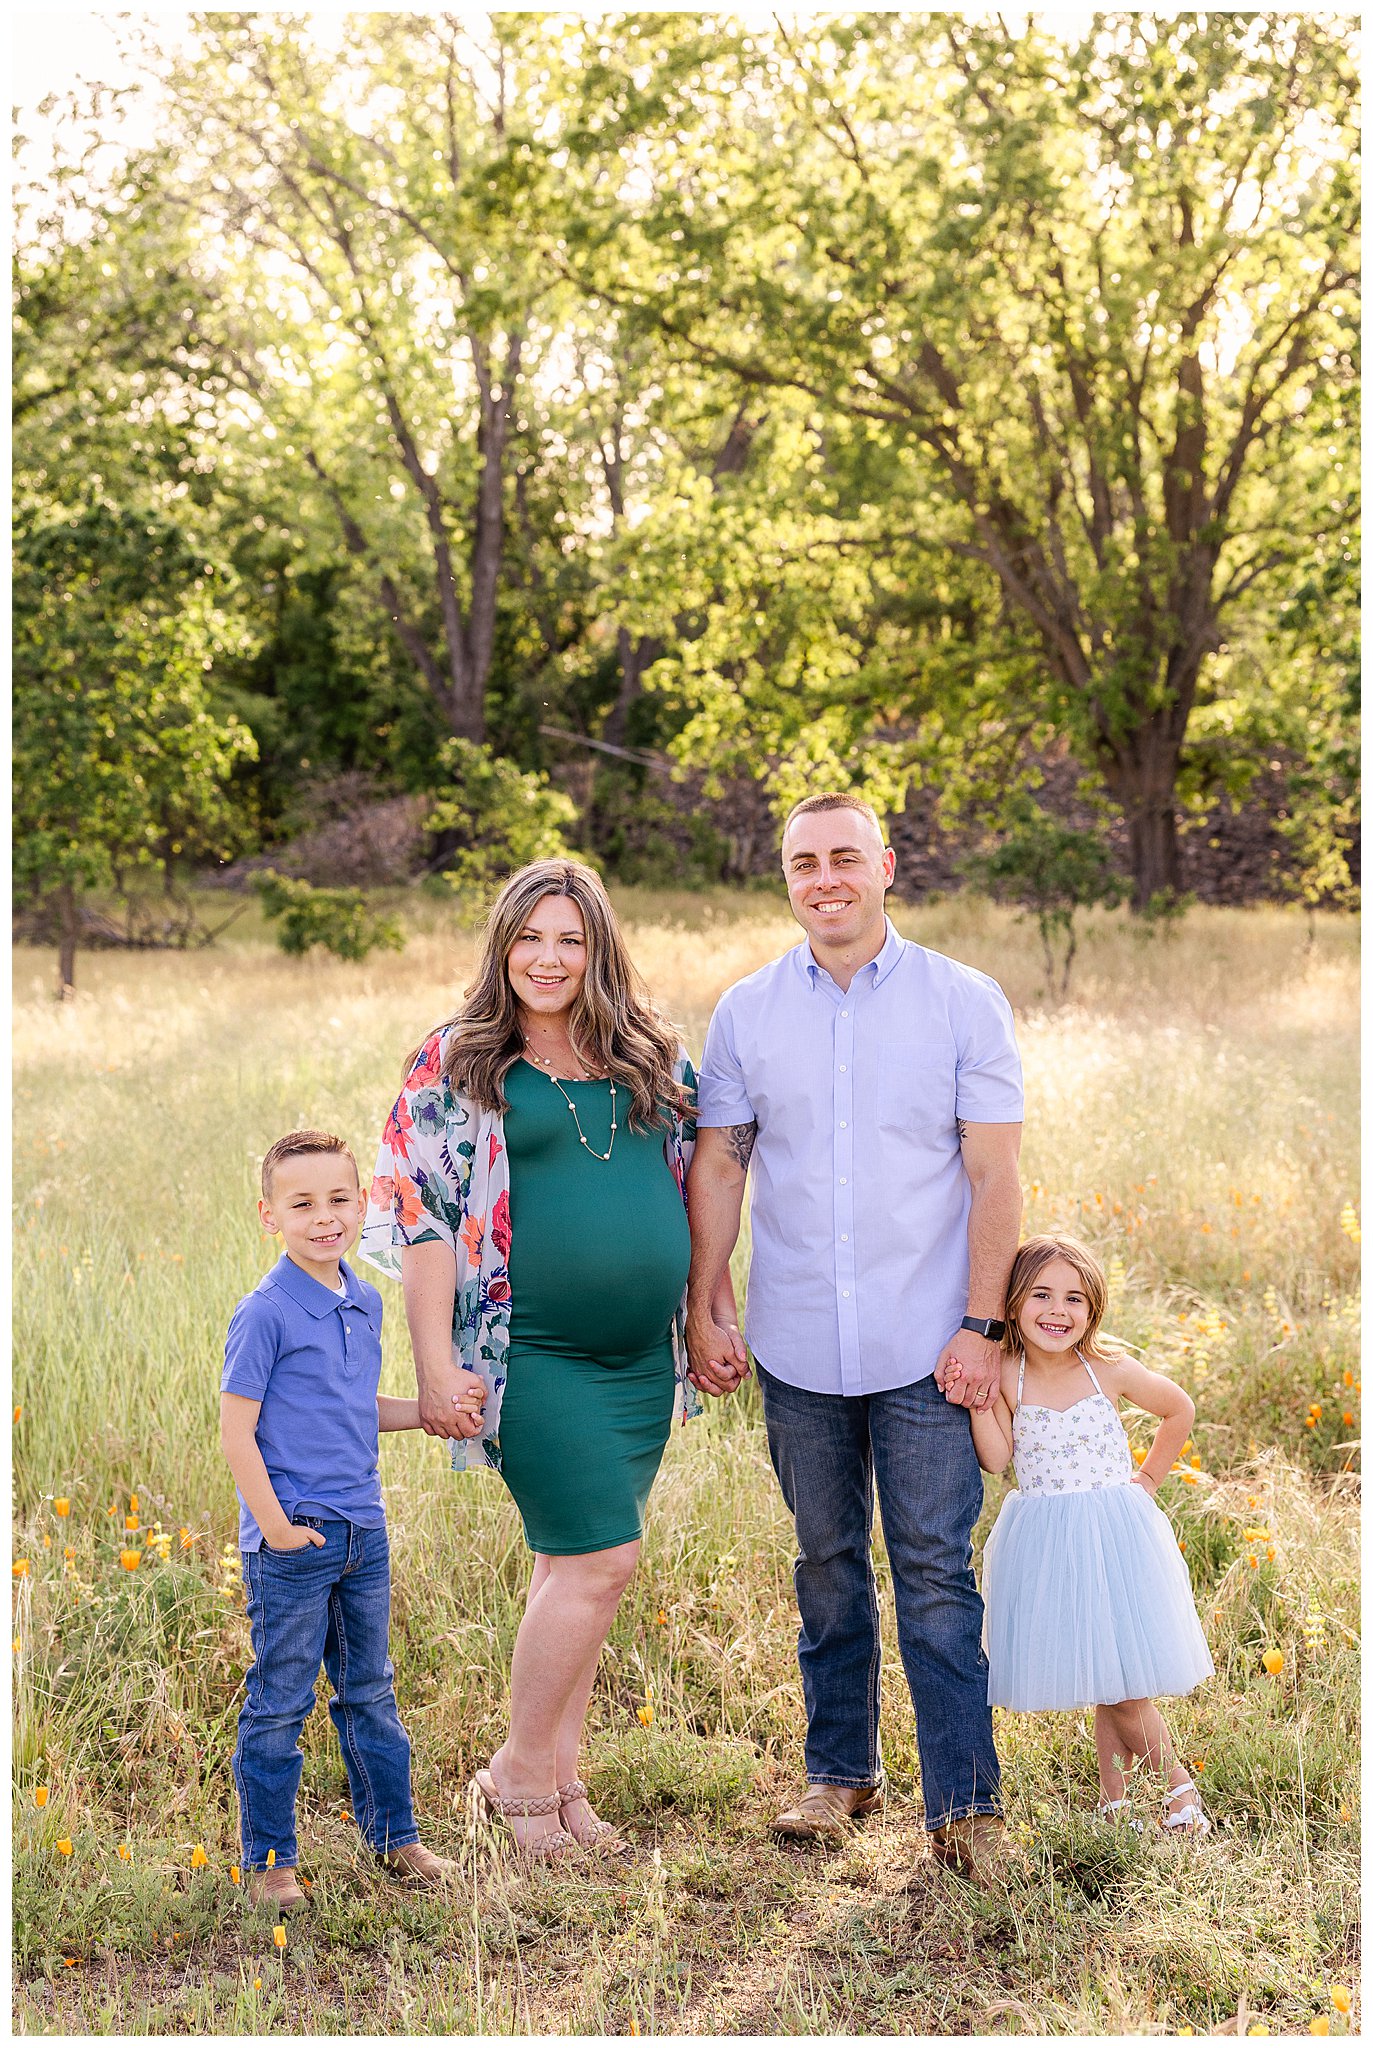 Spring Maternity Session in Wildflower Field Chico CA | Kelsey + Dave